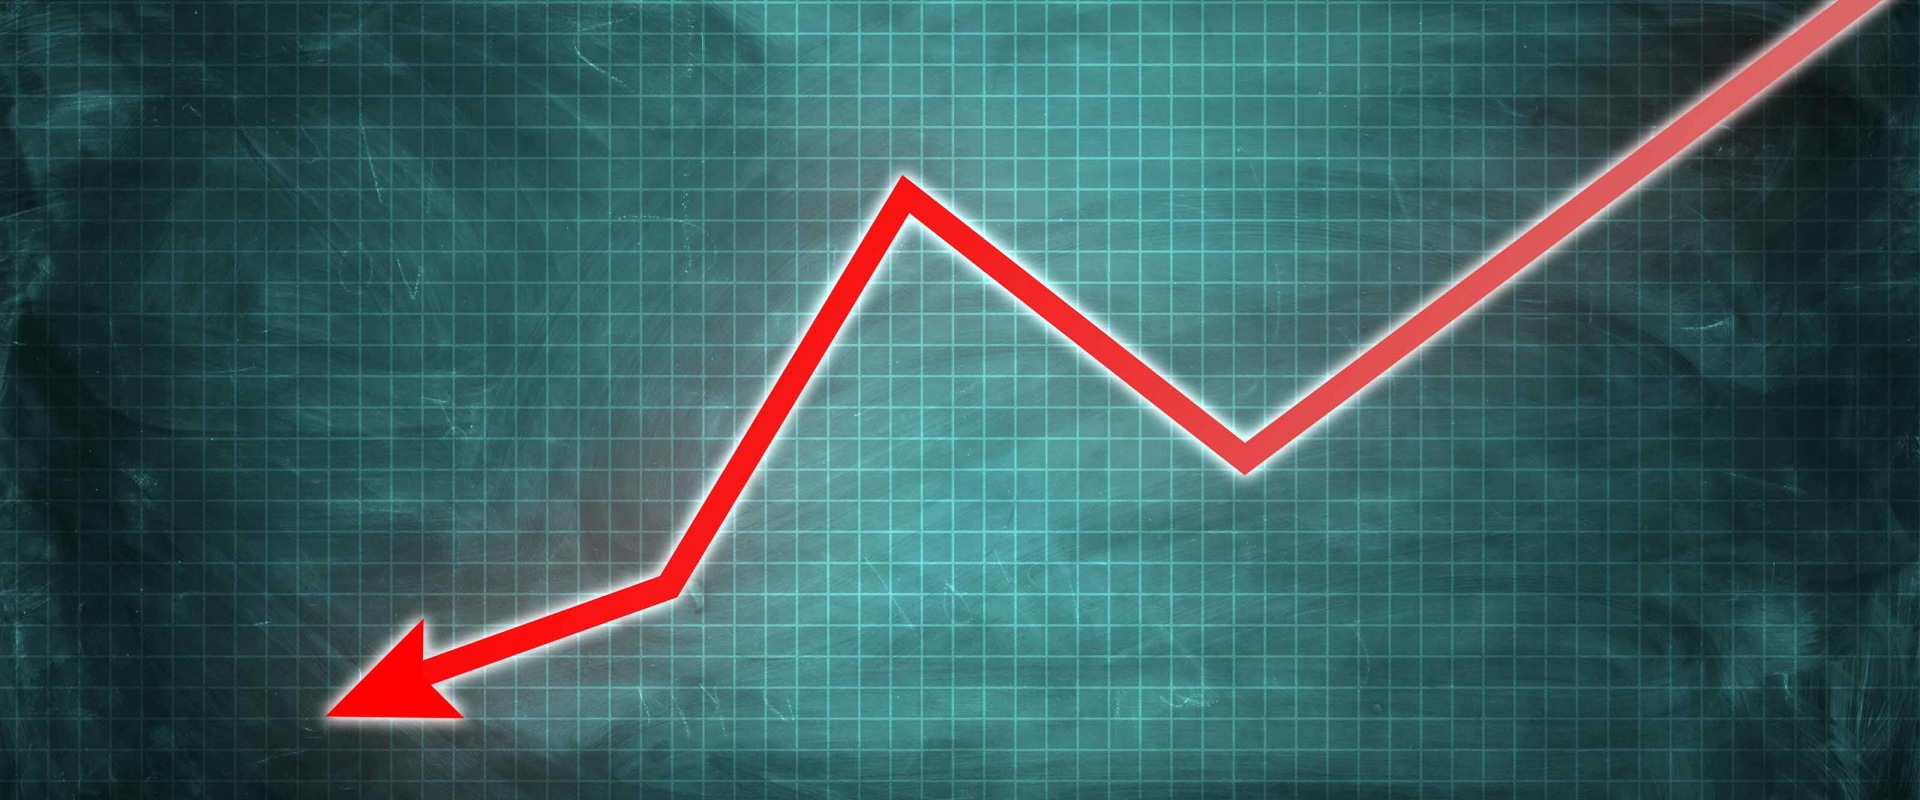 Why is the Stock Market Trending Down?